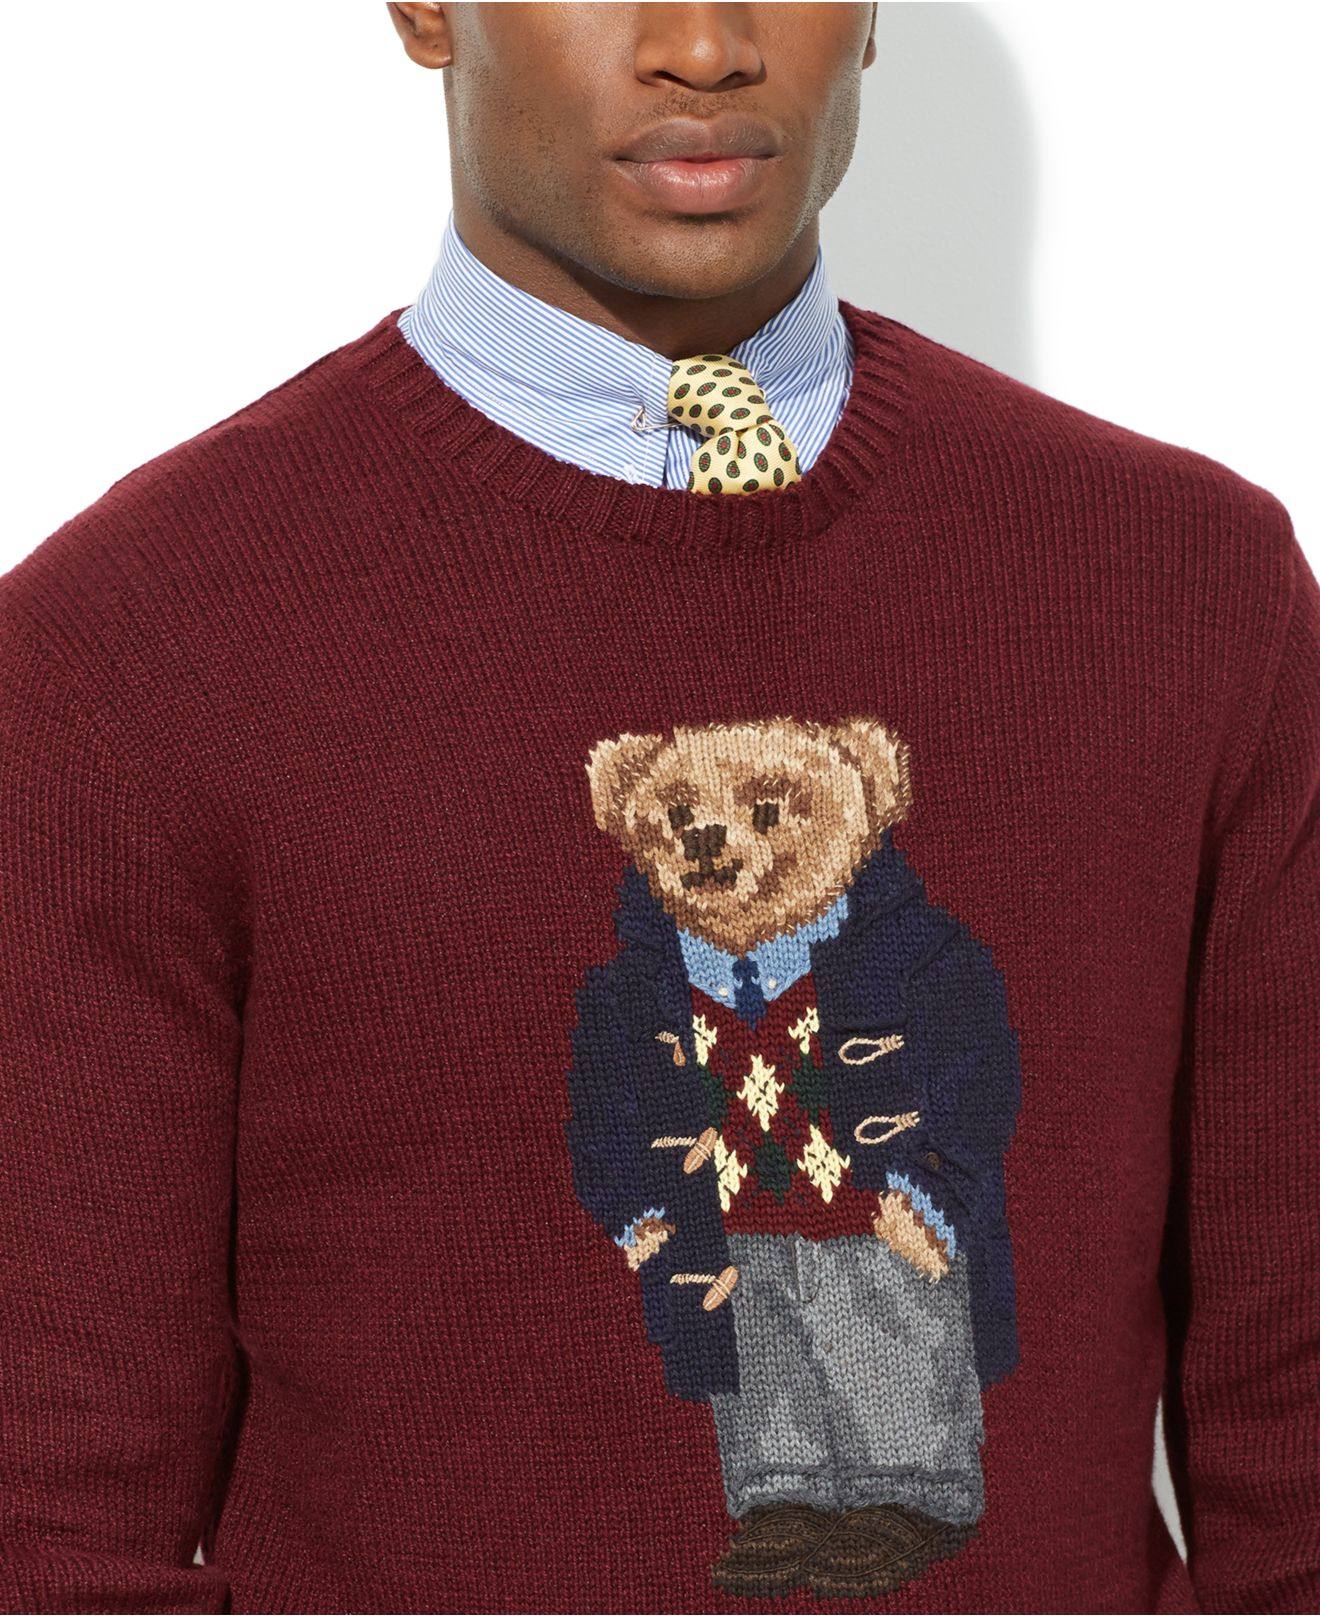 Polo Ralph Lauren Polo Bear Sweater in Red for Men - Lyst